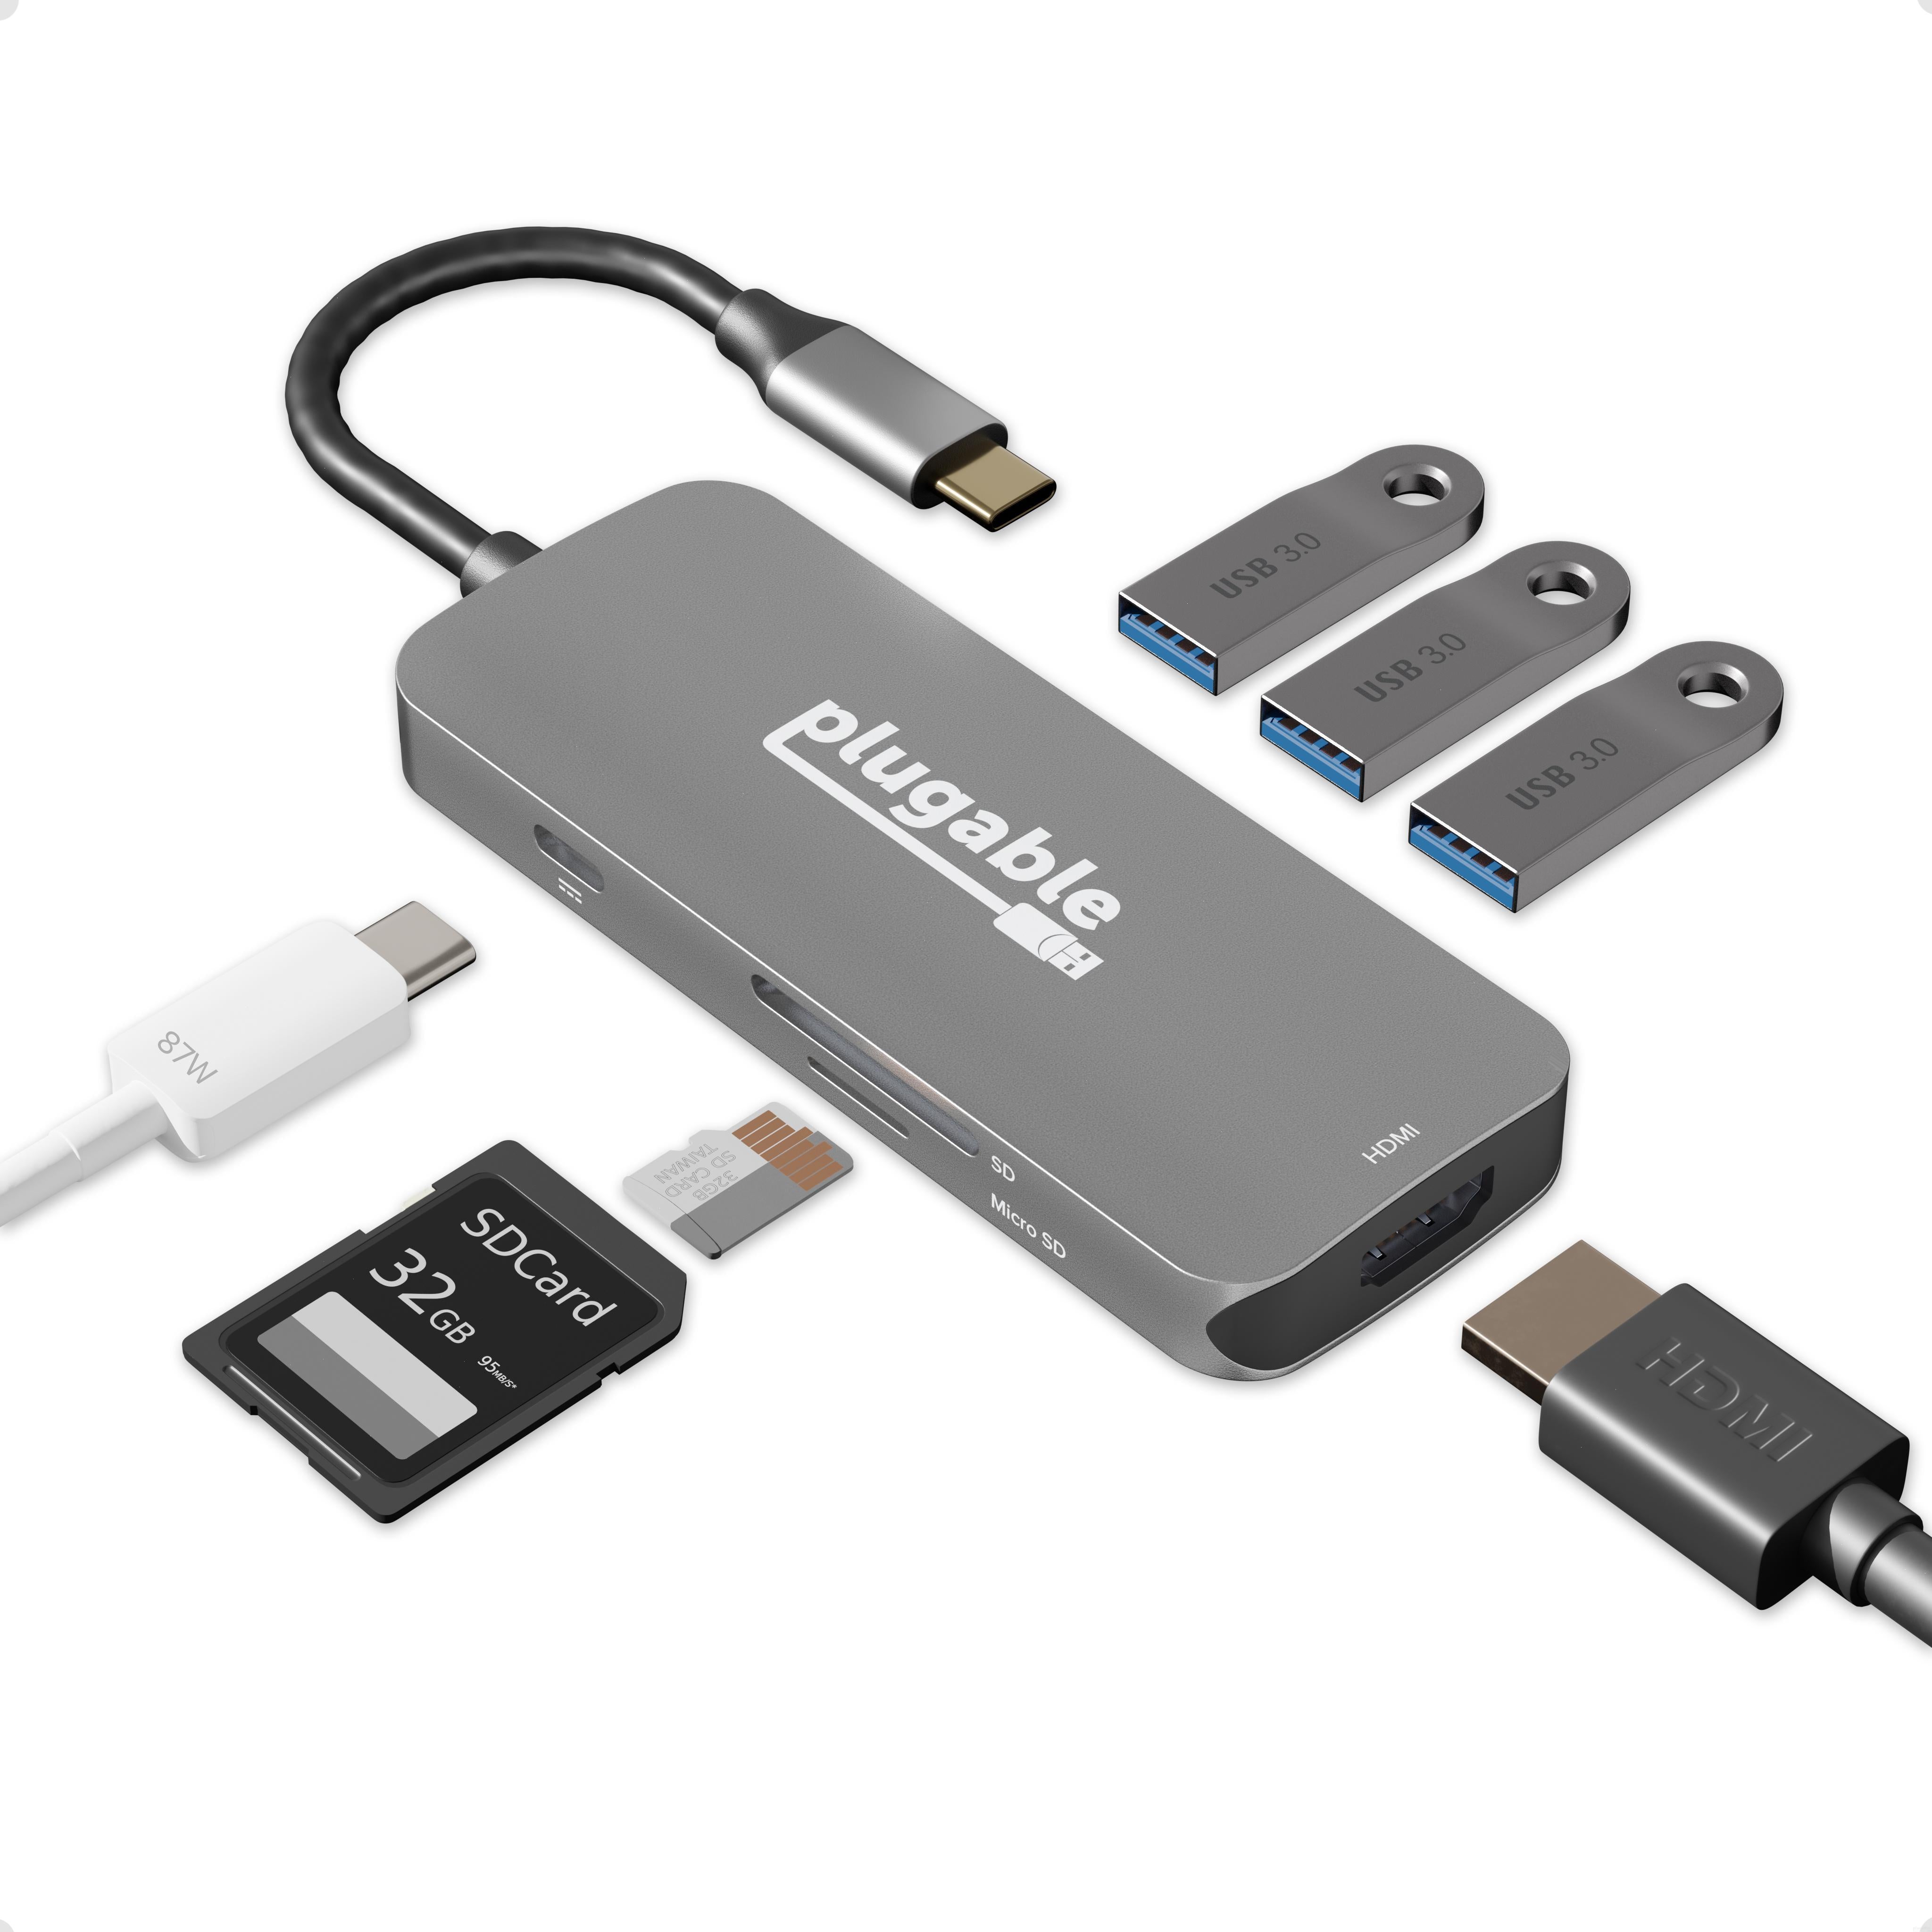 USB Hubs & Adapters: Connect Laptops & Printers